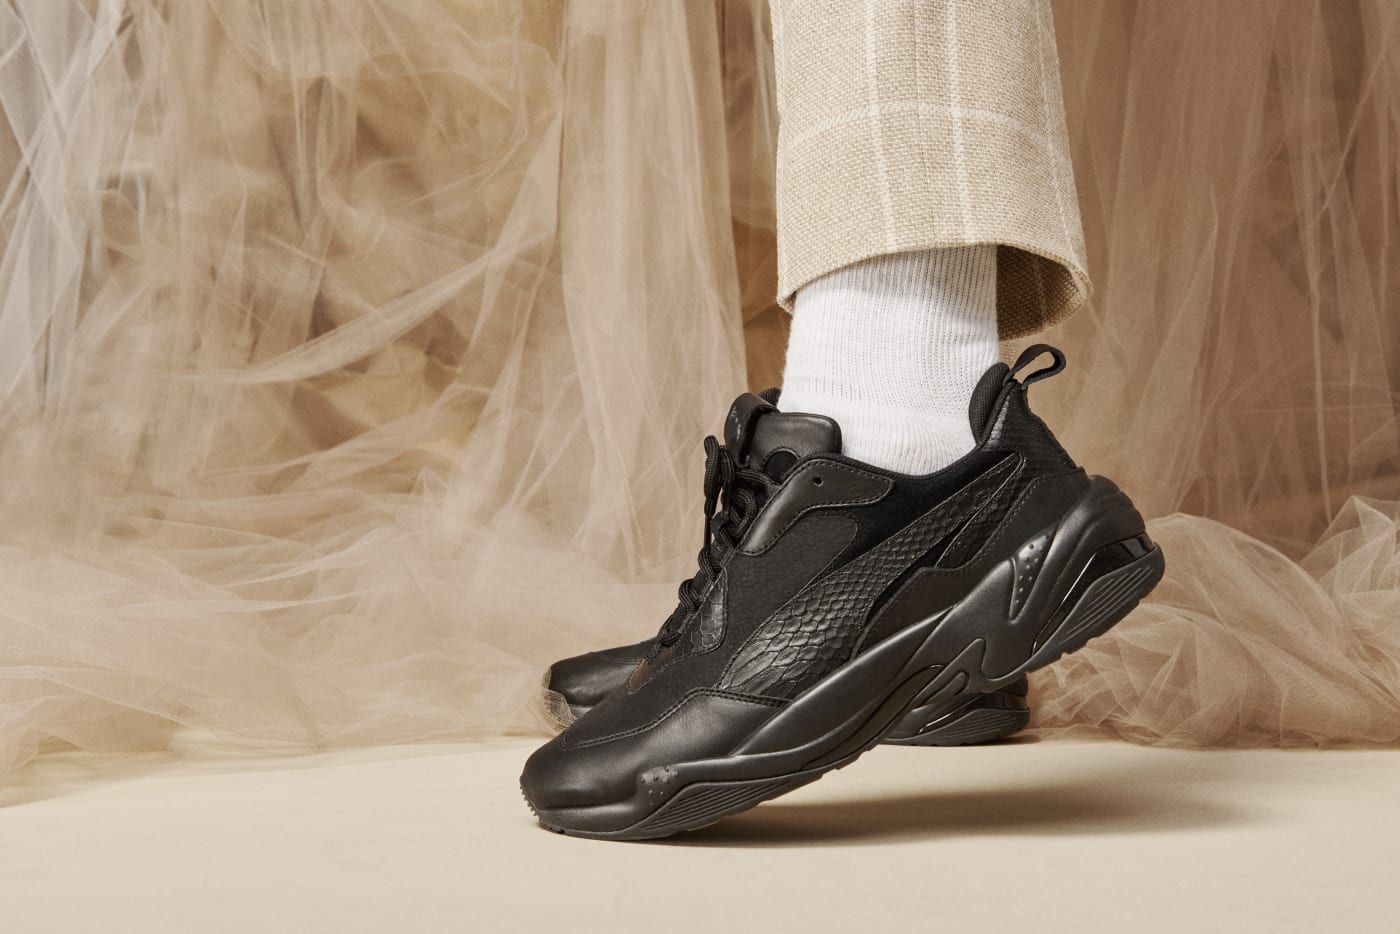 The PUMA Thunder Desert Is Dropping Monochrome Complex